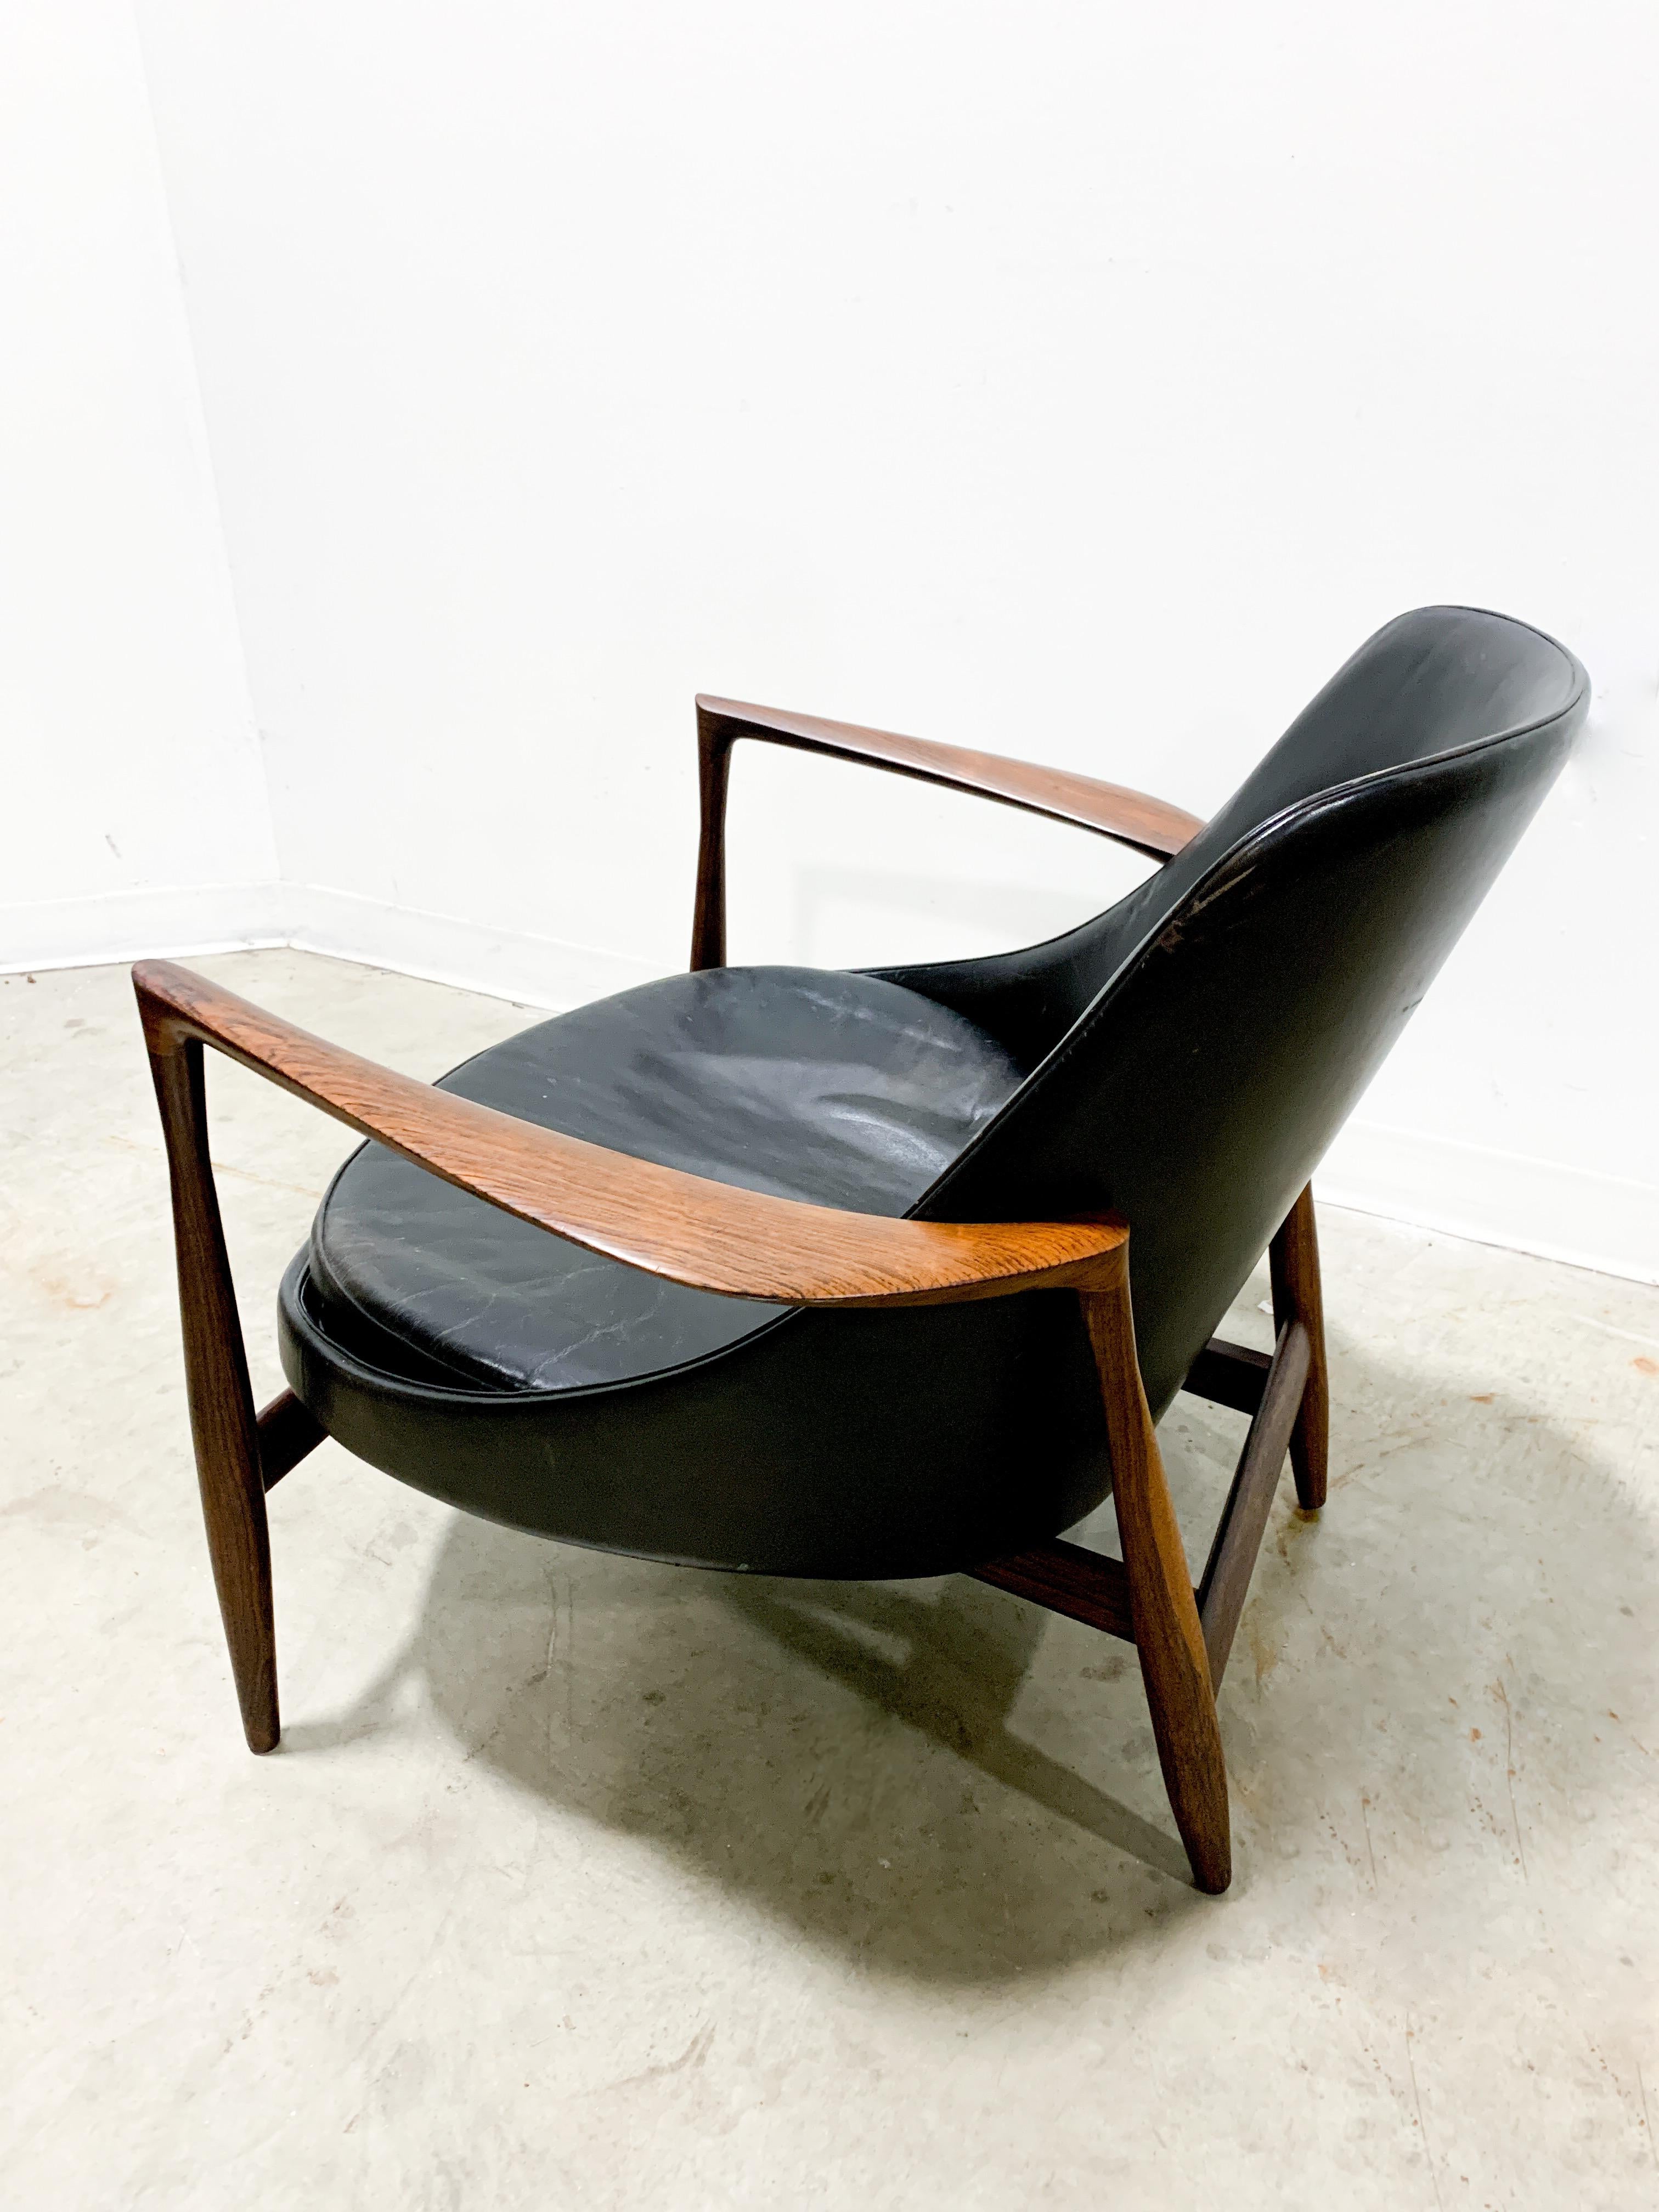 Exquisite and incredibly rare rosewood and leather armchair designed by Ib Kofod-Larsen and made by Christensen and Larsen. Model U56, this chair earned the nickname 'Elizabeth' after Queen Elizabeth II visited Denmark and acquired a pair. The chair